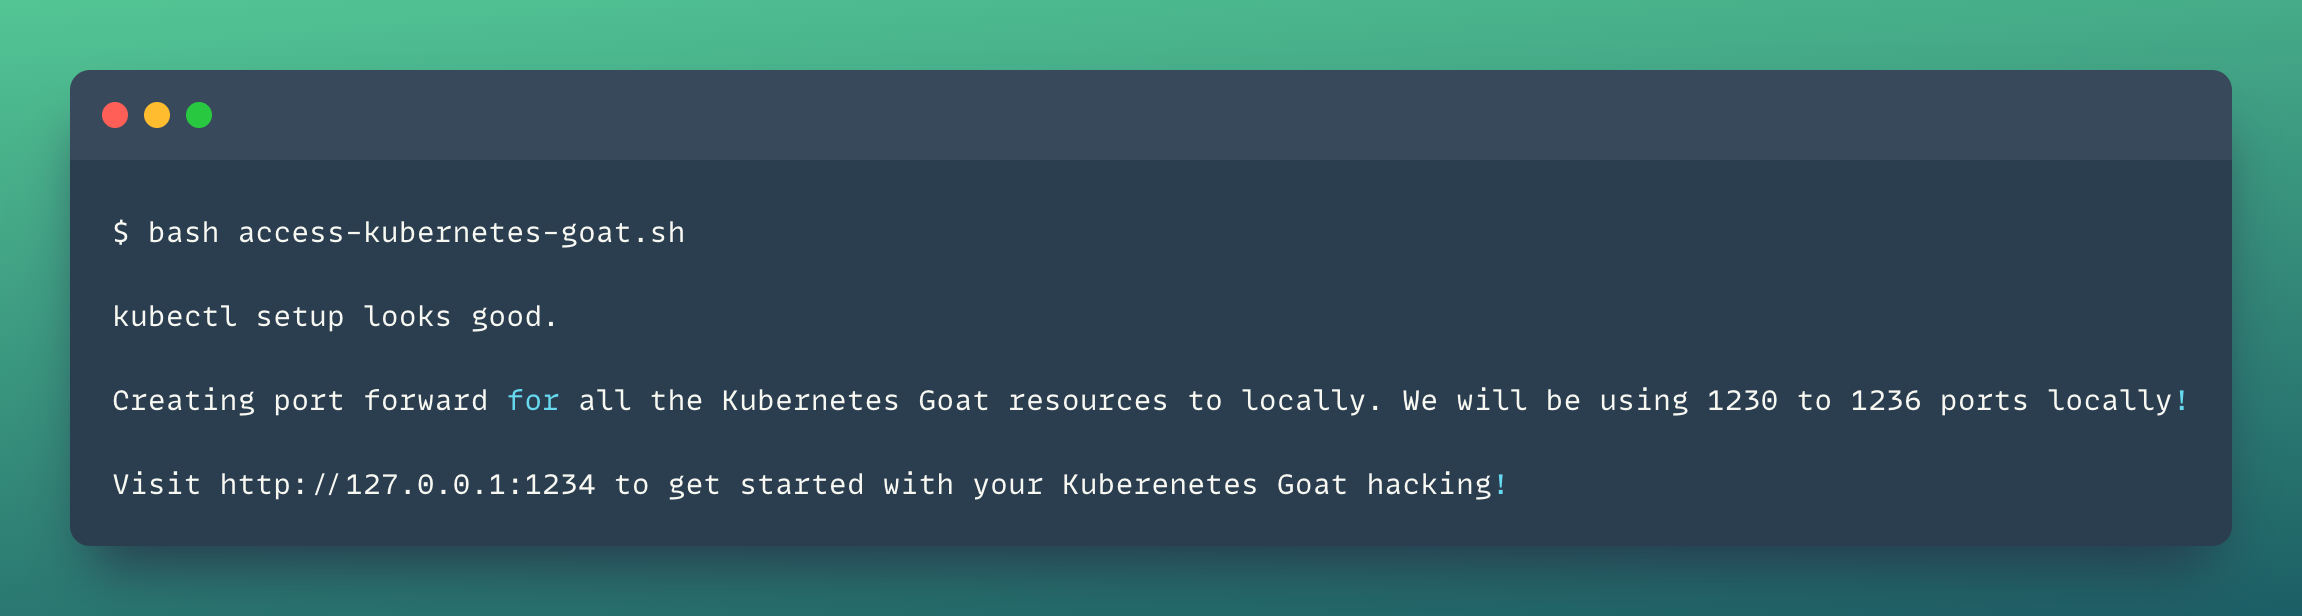 Access kubernetes goat resources